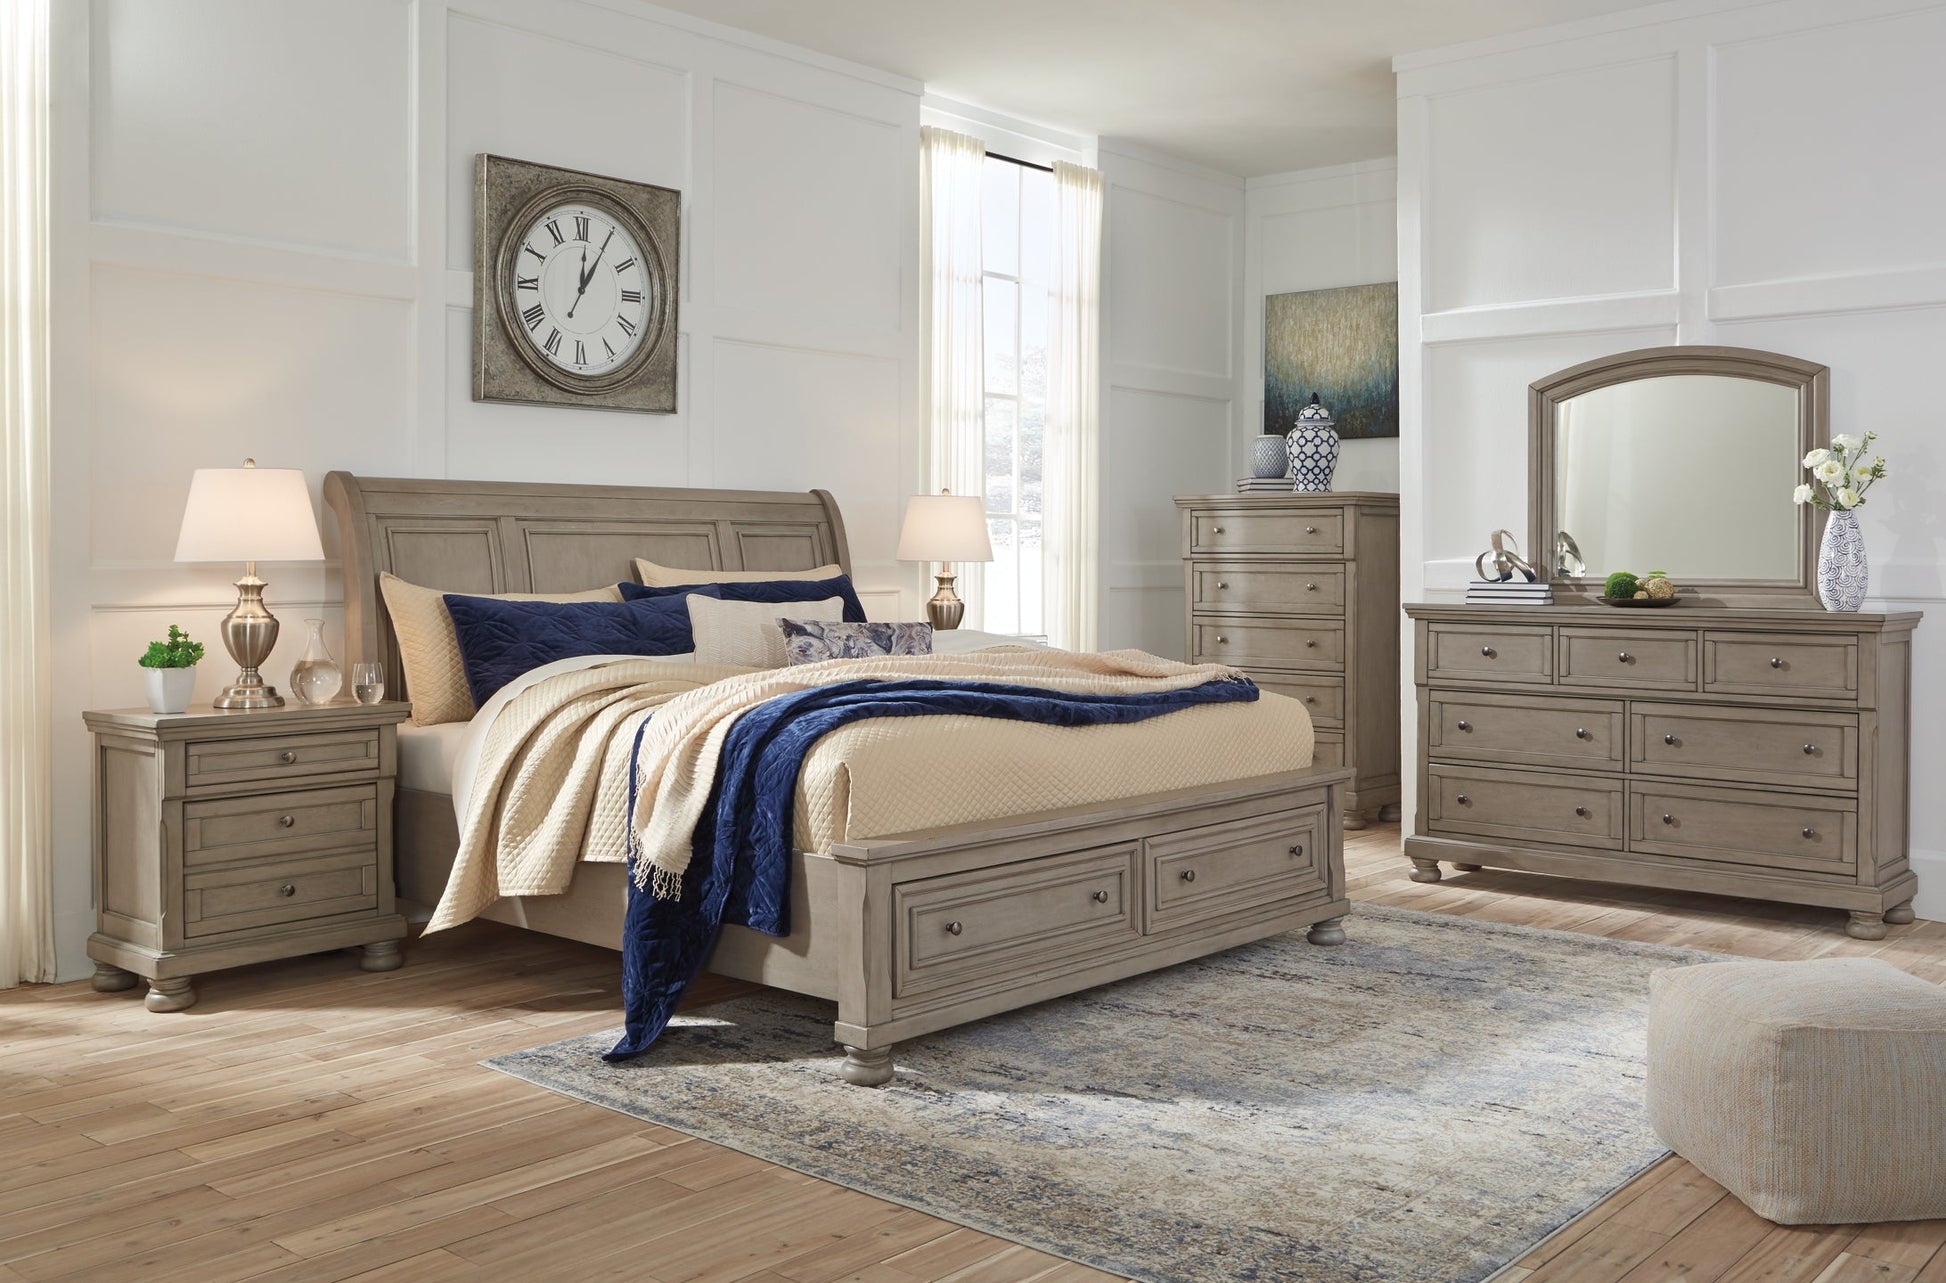 Lettner Queen Sleigh Bed with 2 Storage Drawers with Mirrored Dresser and Chest at Walker Mattress and Furniture Locations in Cedar Park and Belton TX.